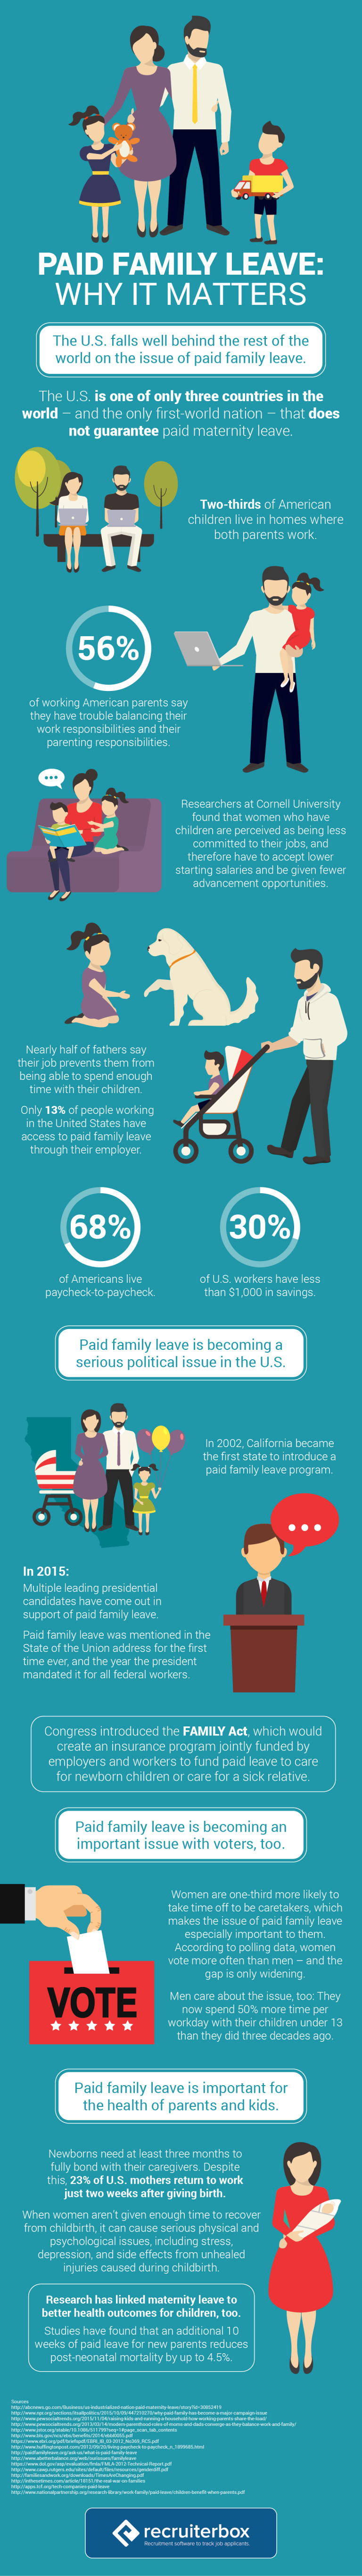 Paid Family Leave: Why It Matters [Infographic]